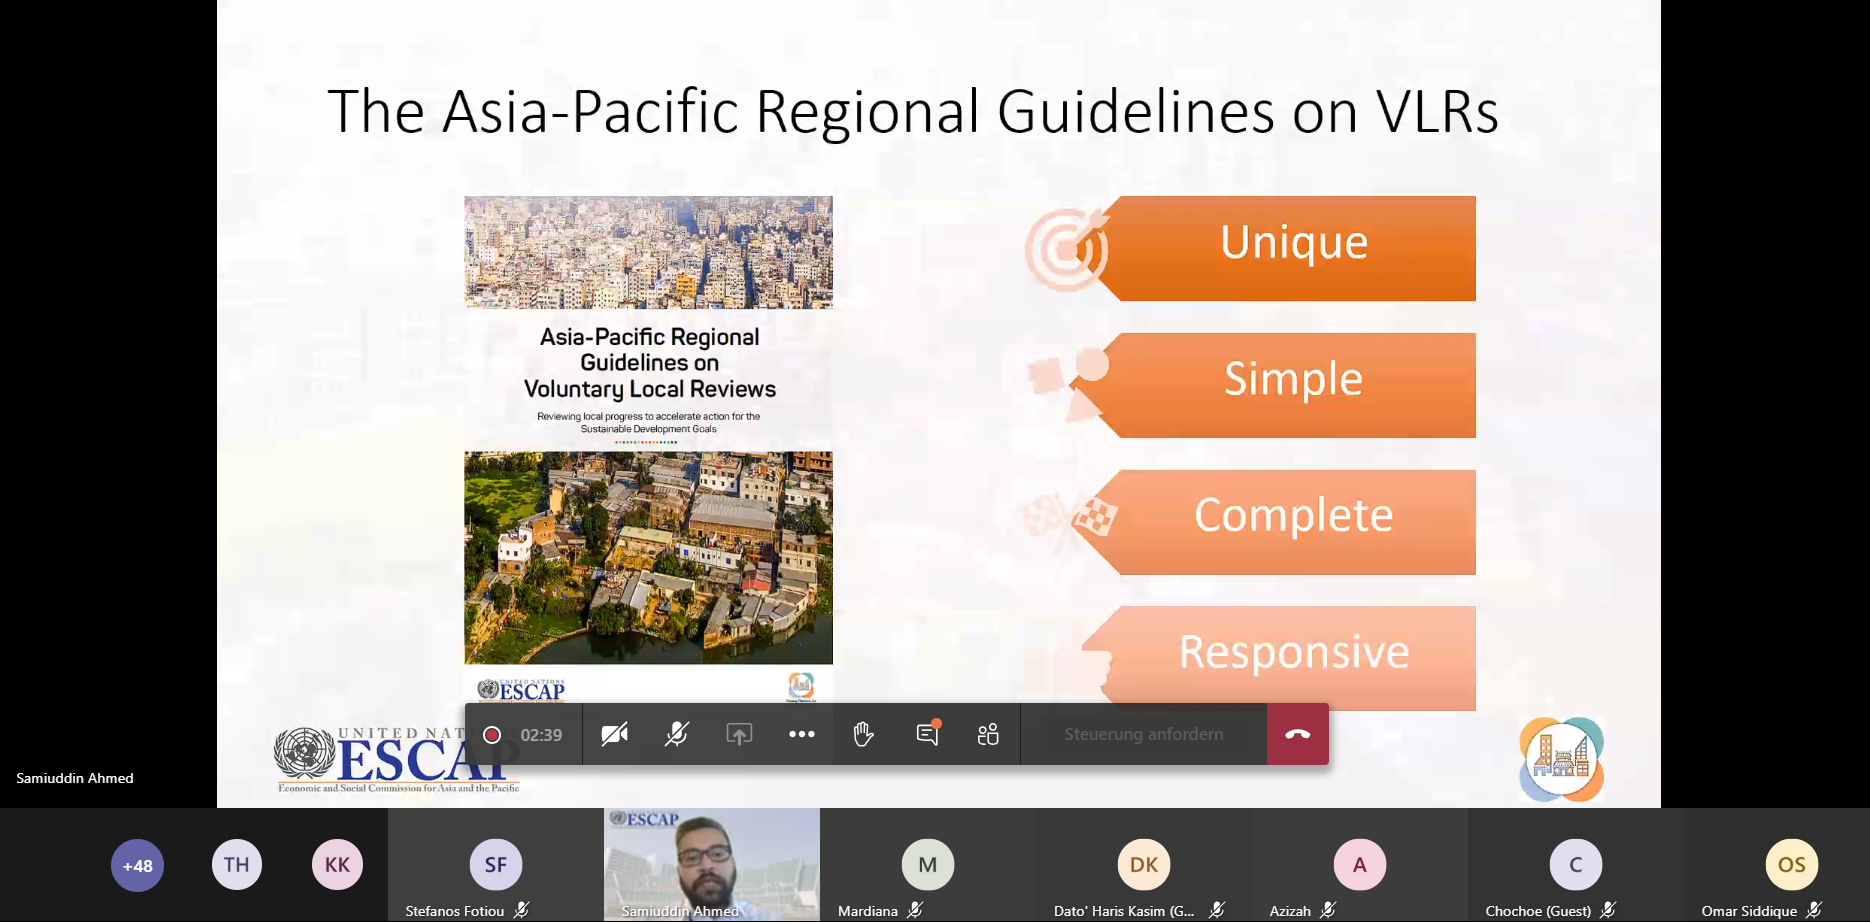 VLRs: IUC Asia participates in UNESCAP meeting on Asia-Pacific Regional Guidelines on Voluntary Local Reviews